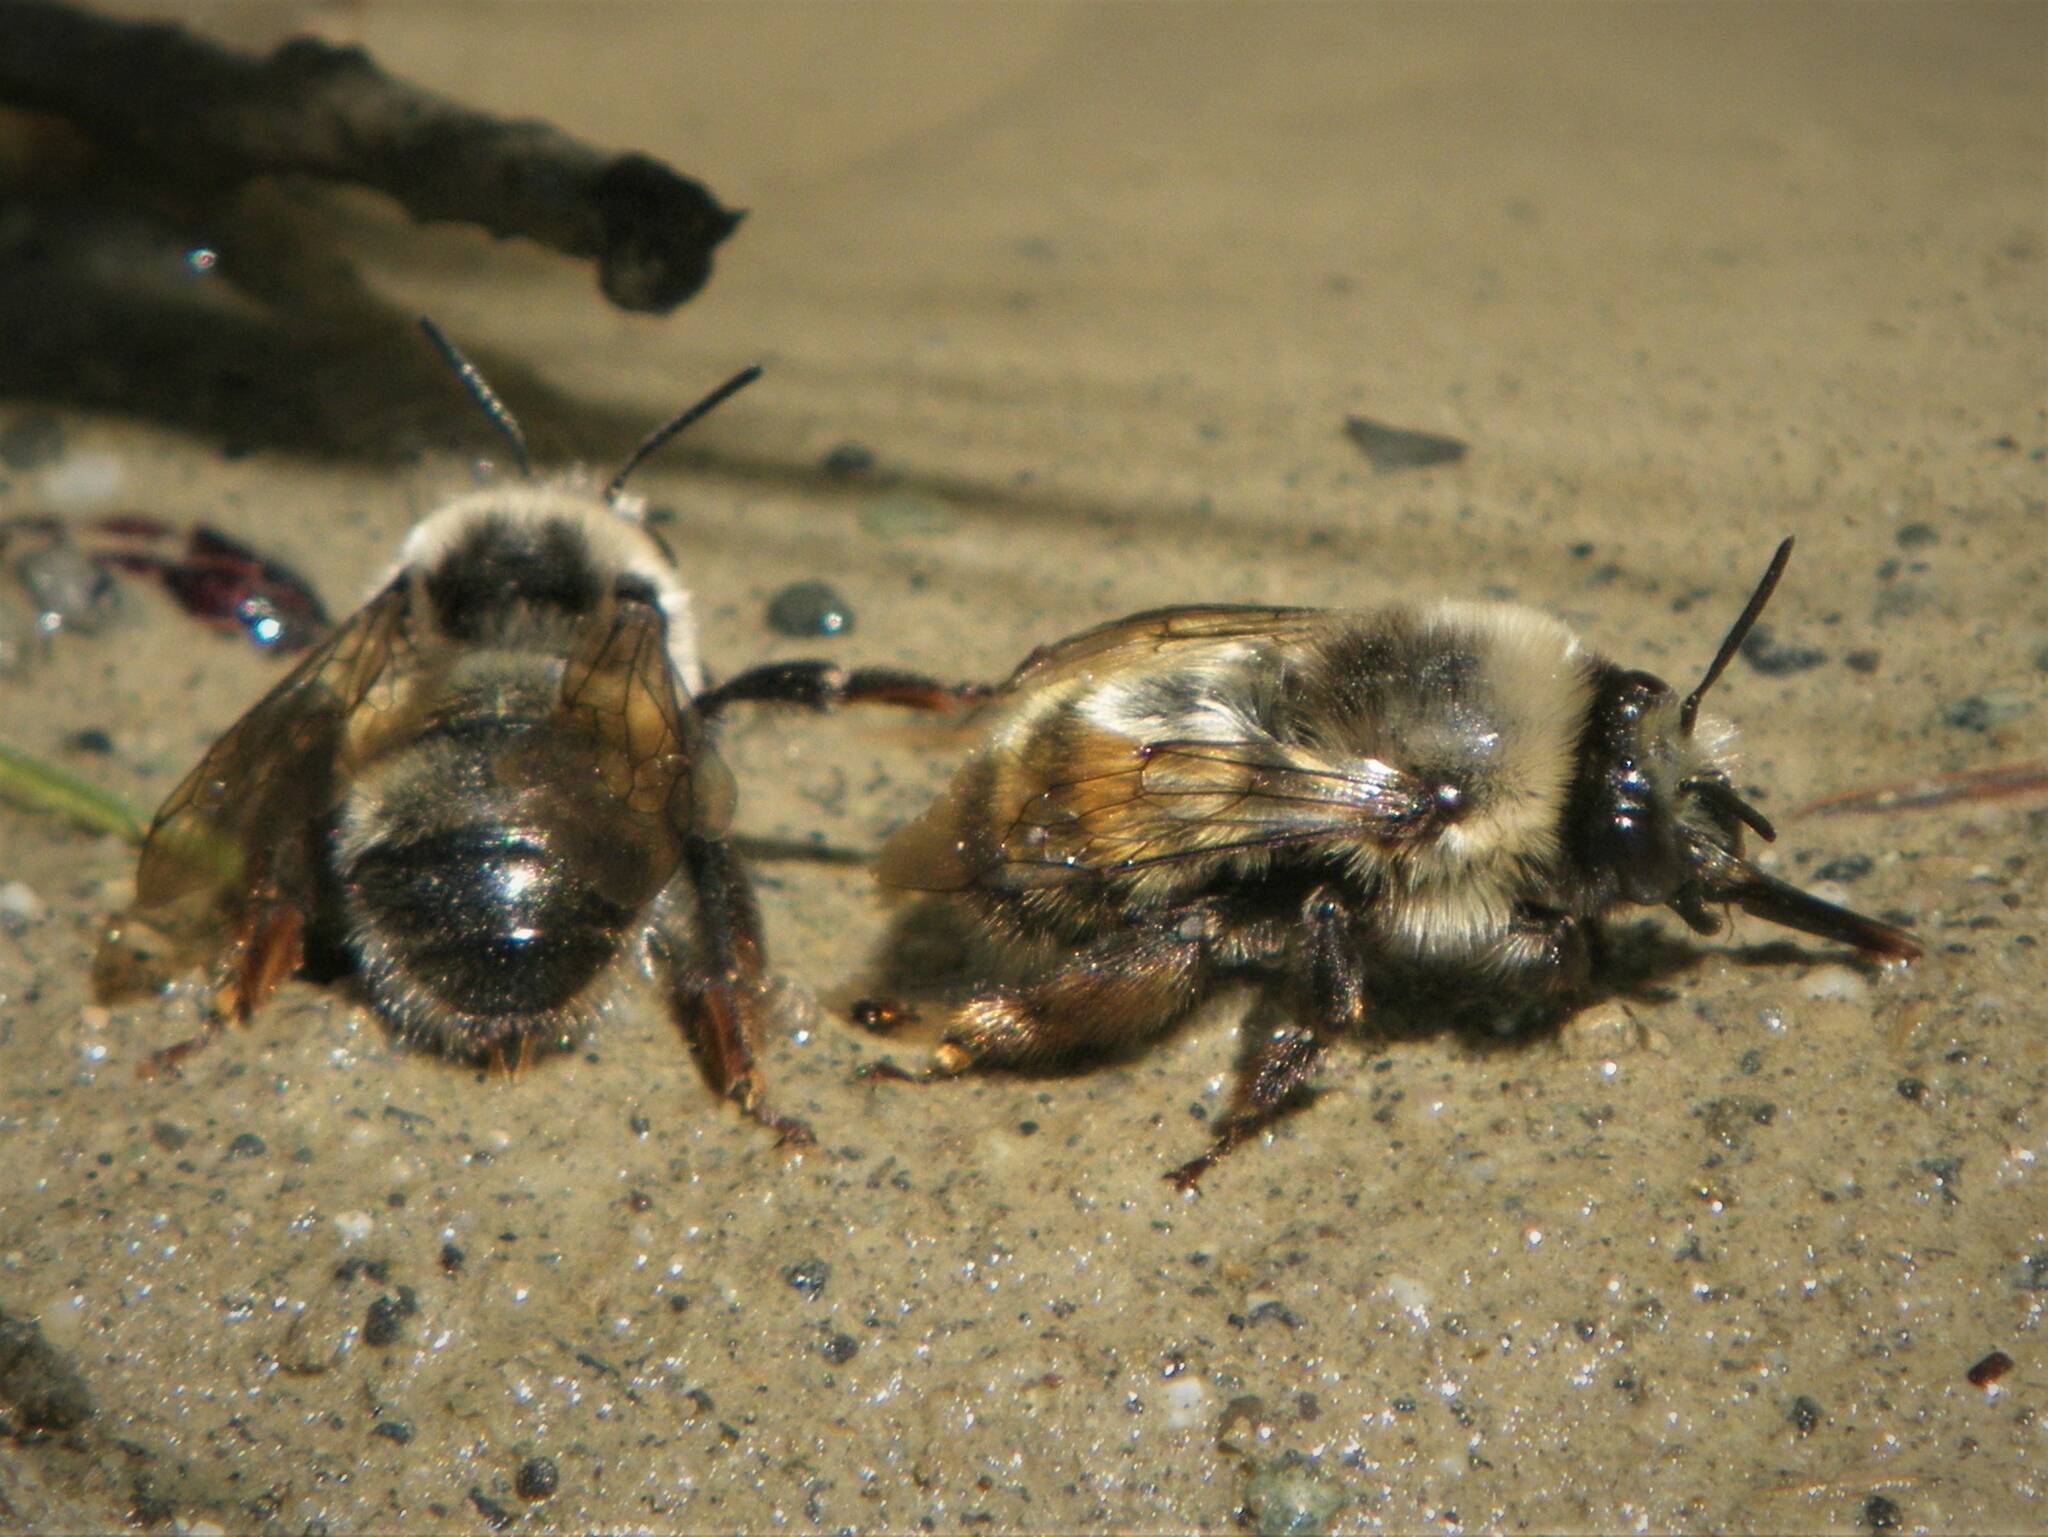 Contributed photo by Russel Barsh
Digger Bees on the seashore